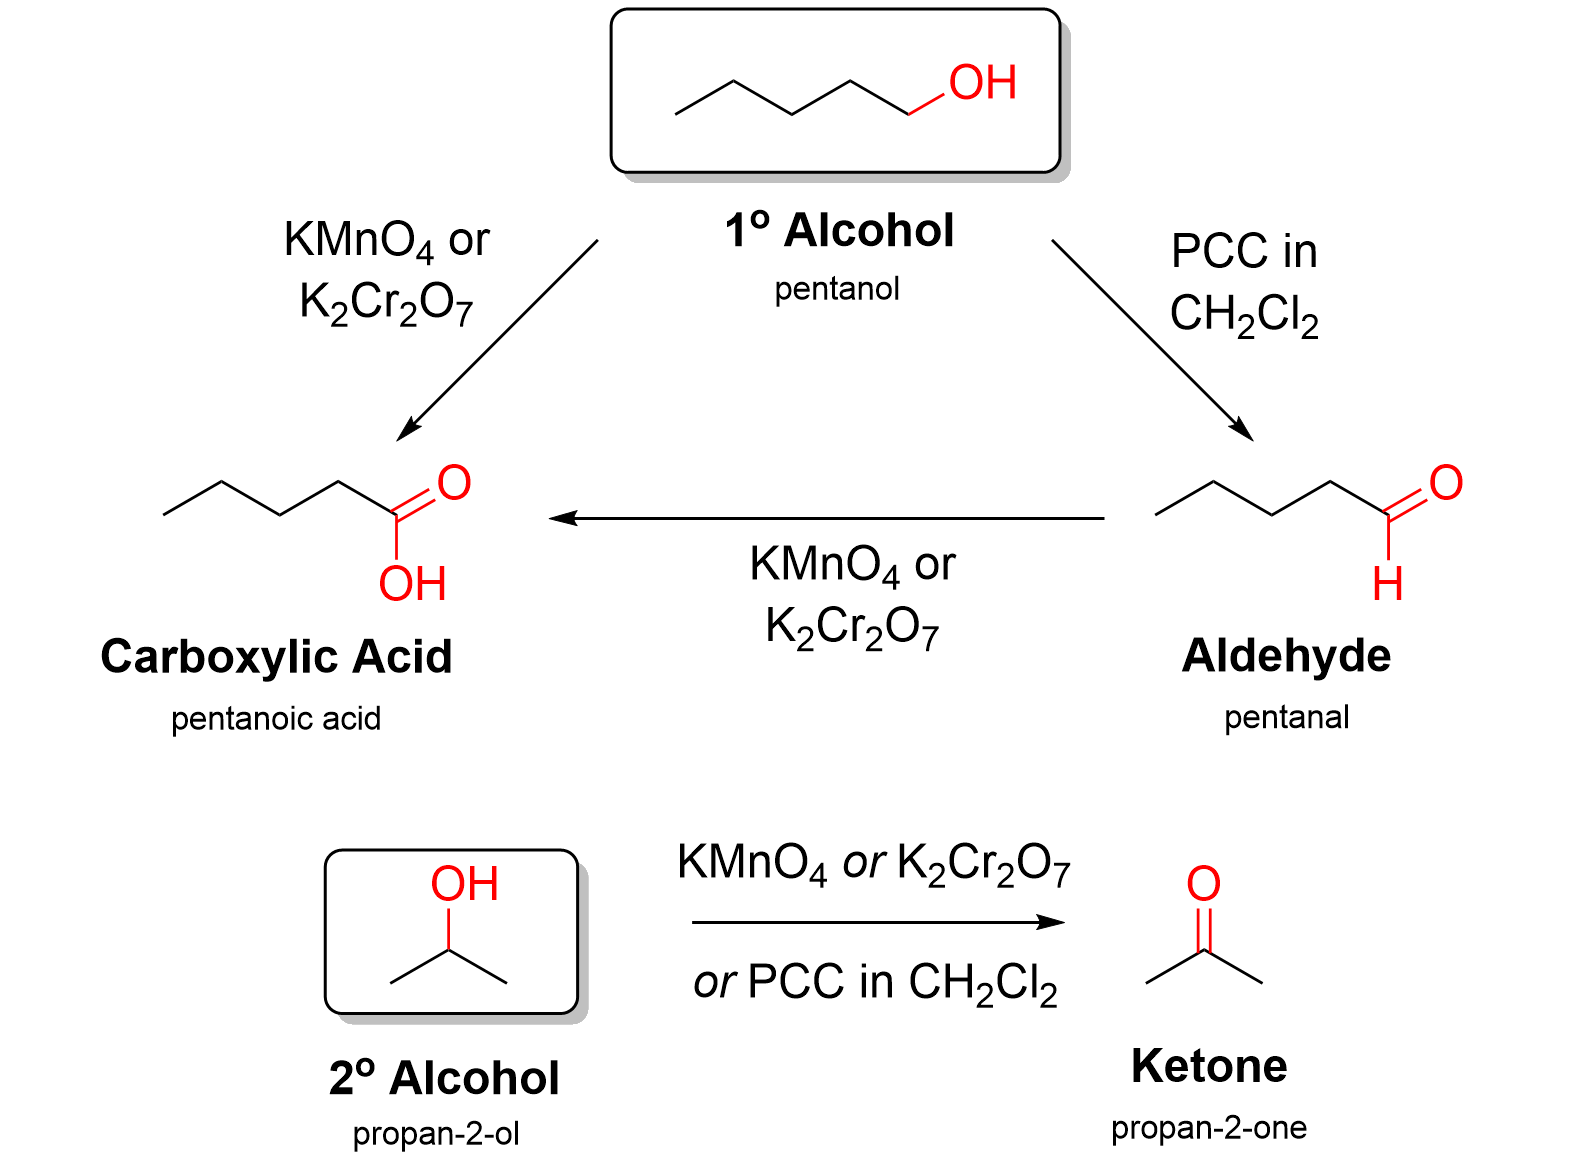 Pentanol with various reagents reacting in a scheme to form different products, oxidizing to pentanal and pentanoic acid. Propan-2-ol oxidizes similarly.